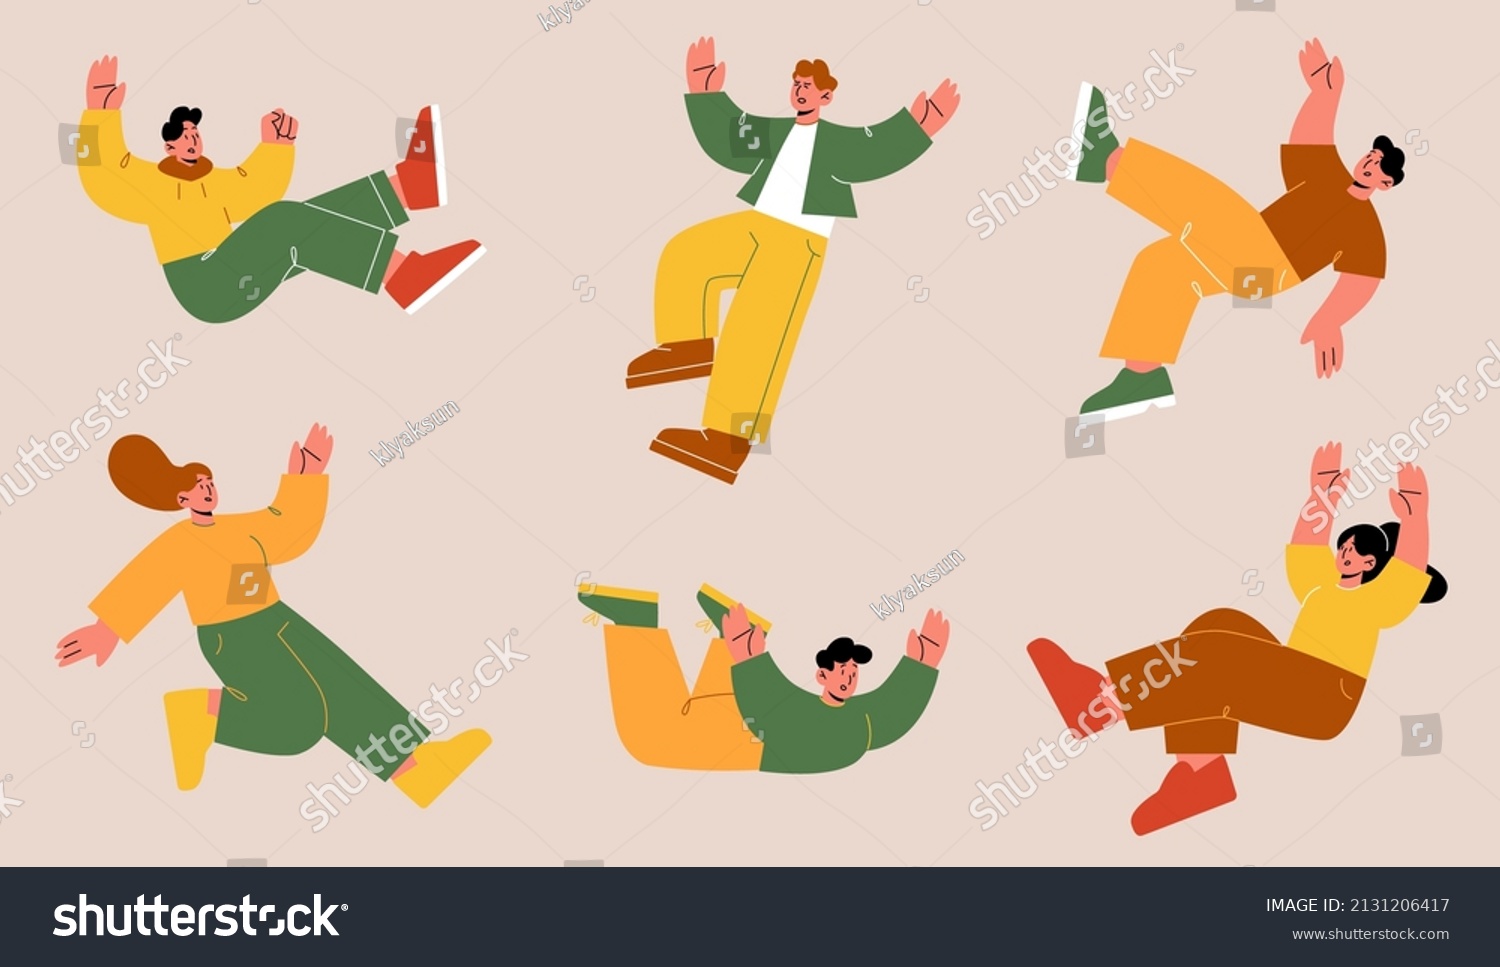 People fall down after slip, slide on wet floor or stumble. Vector flat illustration with person falling with injury risk. Men and women in shock and panic tumble down #2131206417